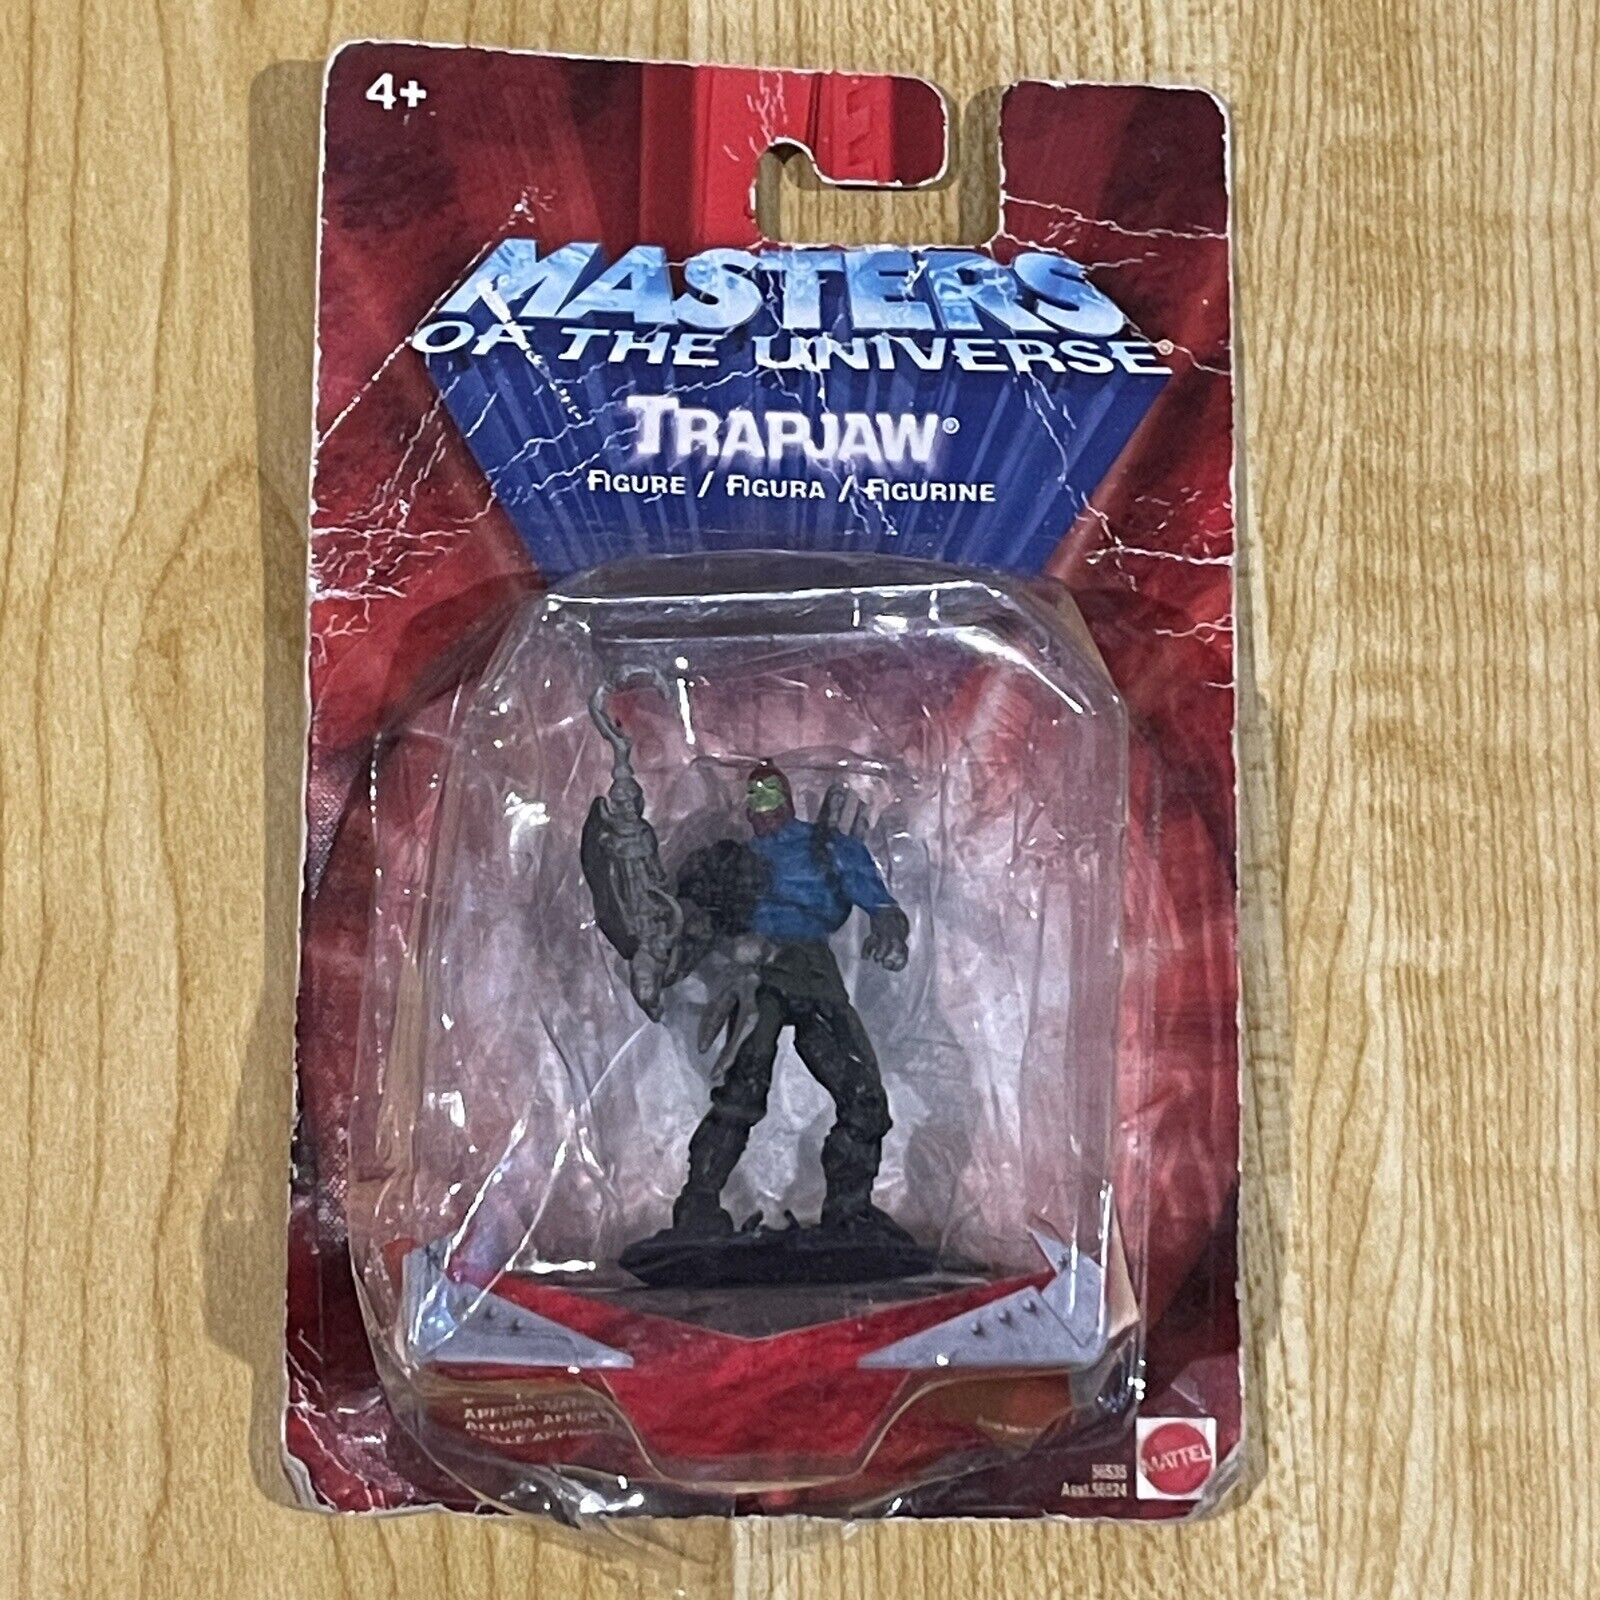 NEW 2002 Mattel Masters of the Universe Trapjaw 2.75" Action Figure